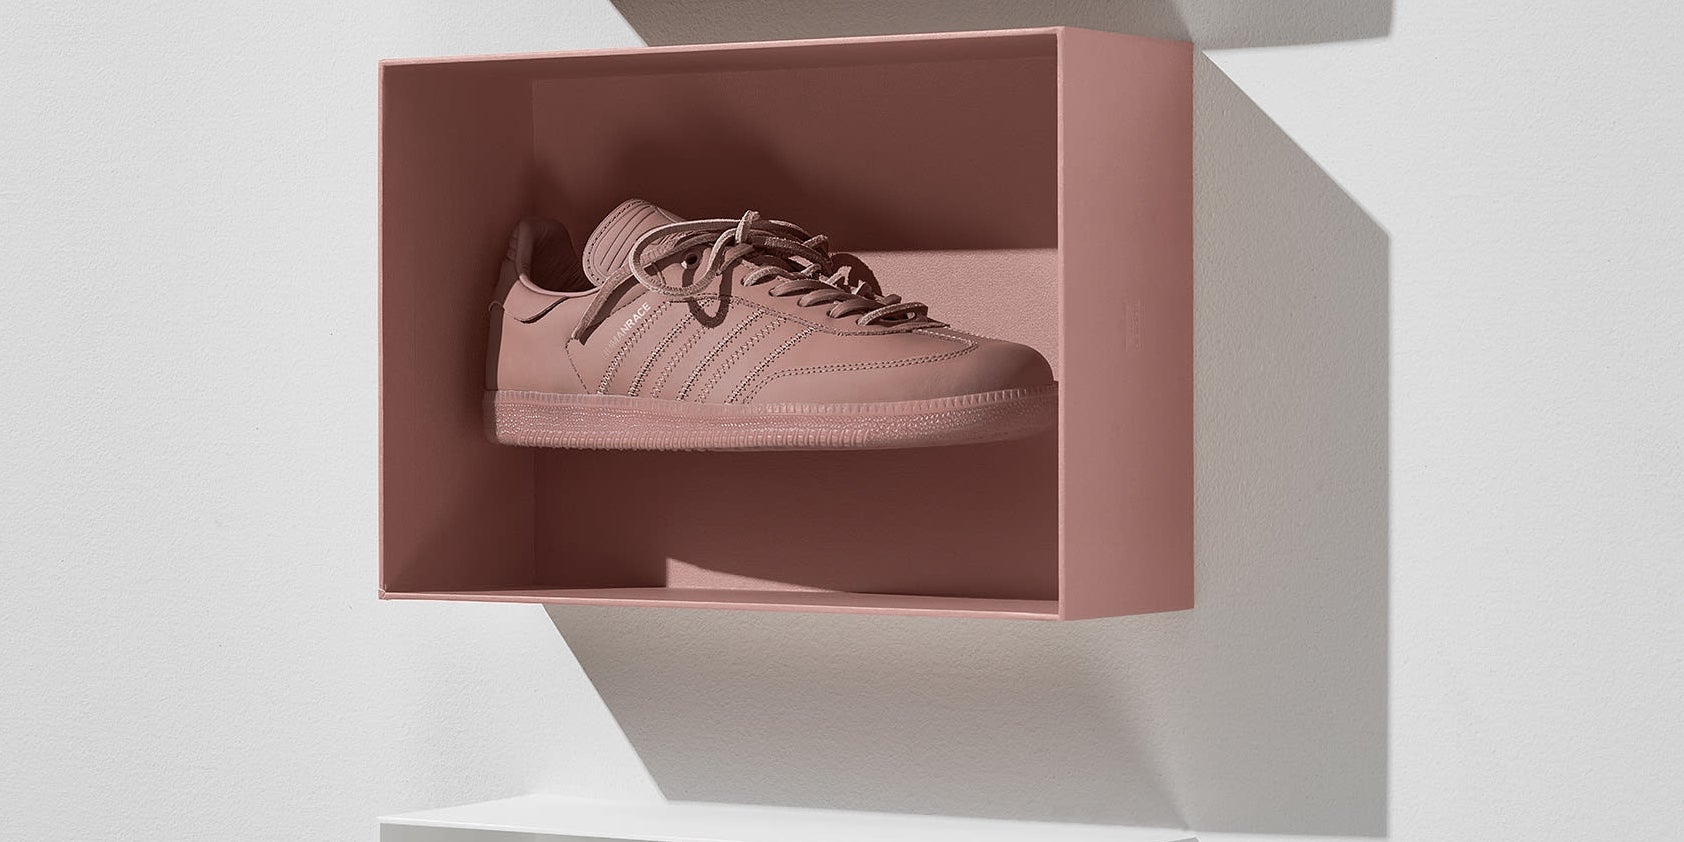 Pharrell Williams' Humanrace™ and adidas Originals Unveil Their Most  Elevated Footwear Collection to Date with Humanrace Samba Colors by Pharrell